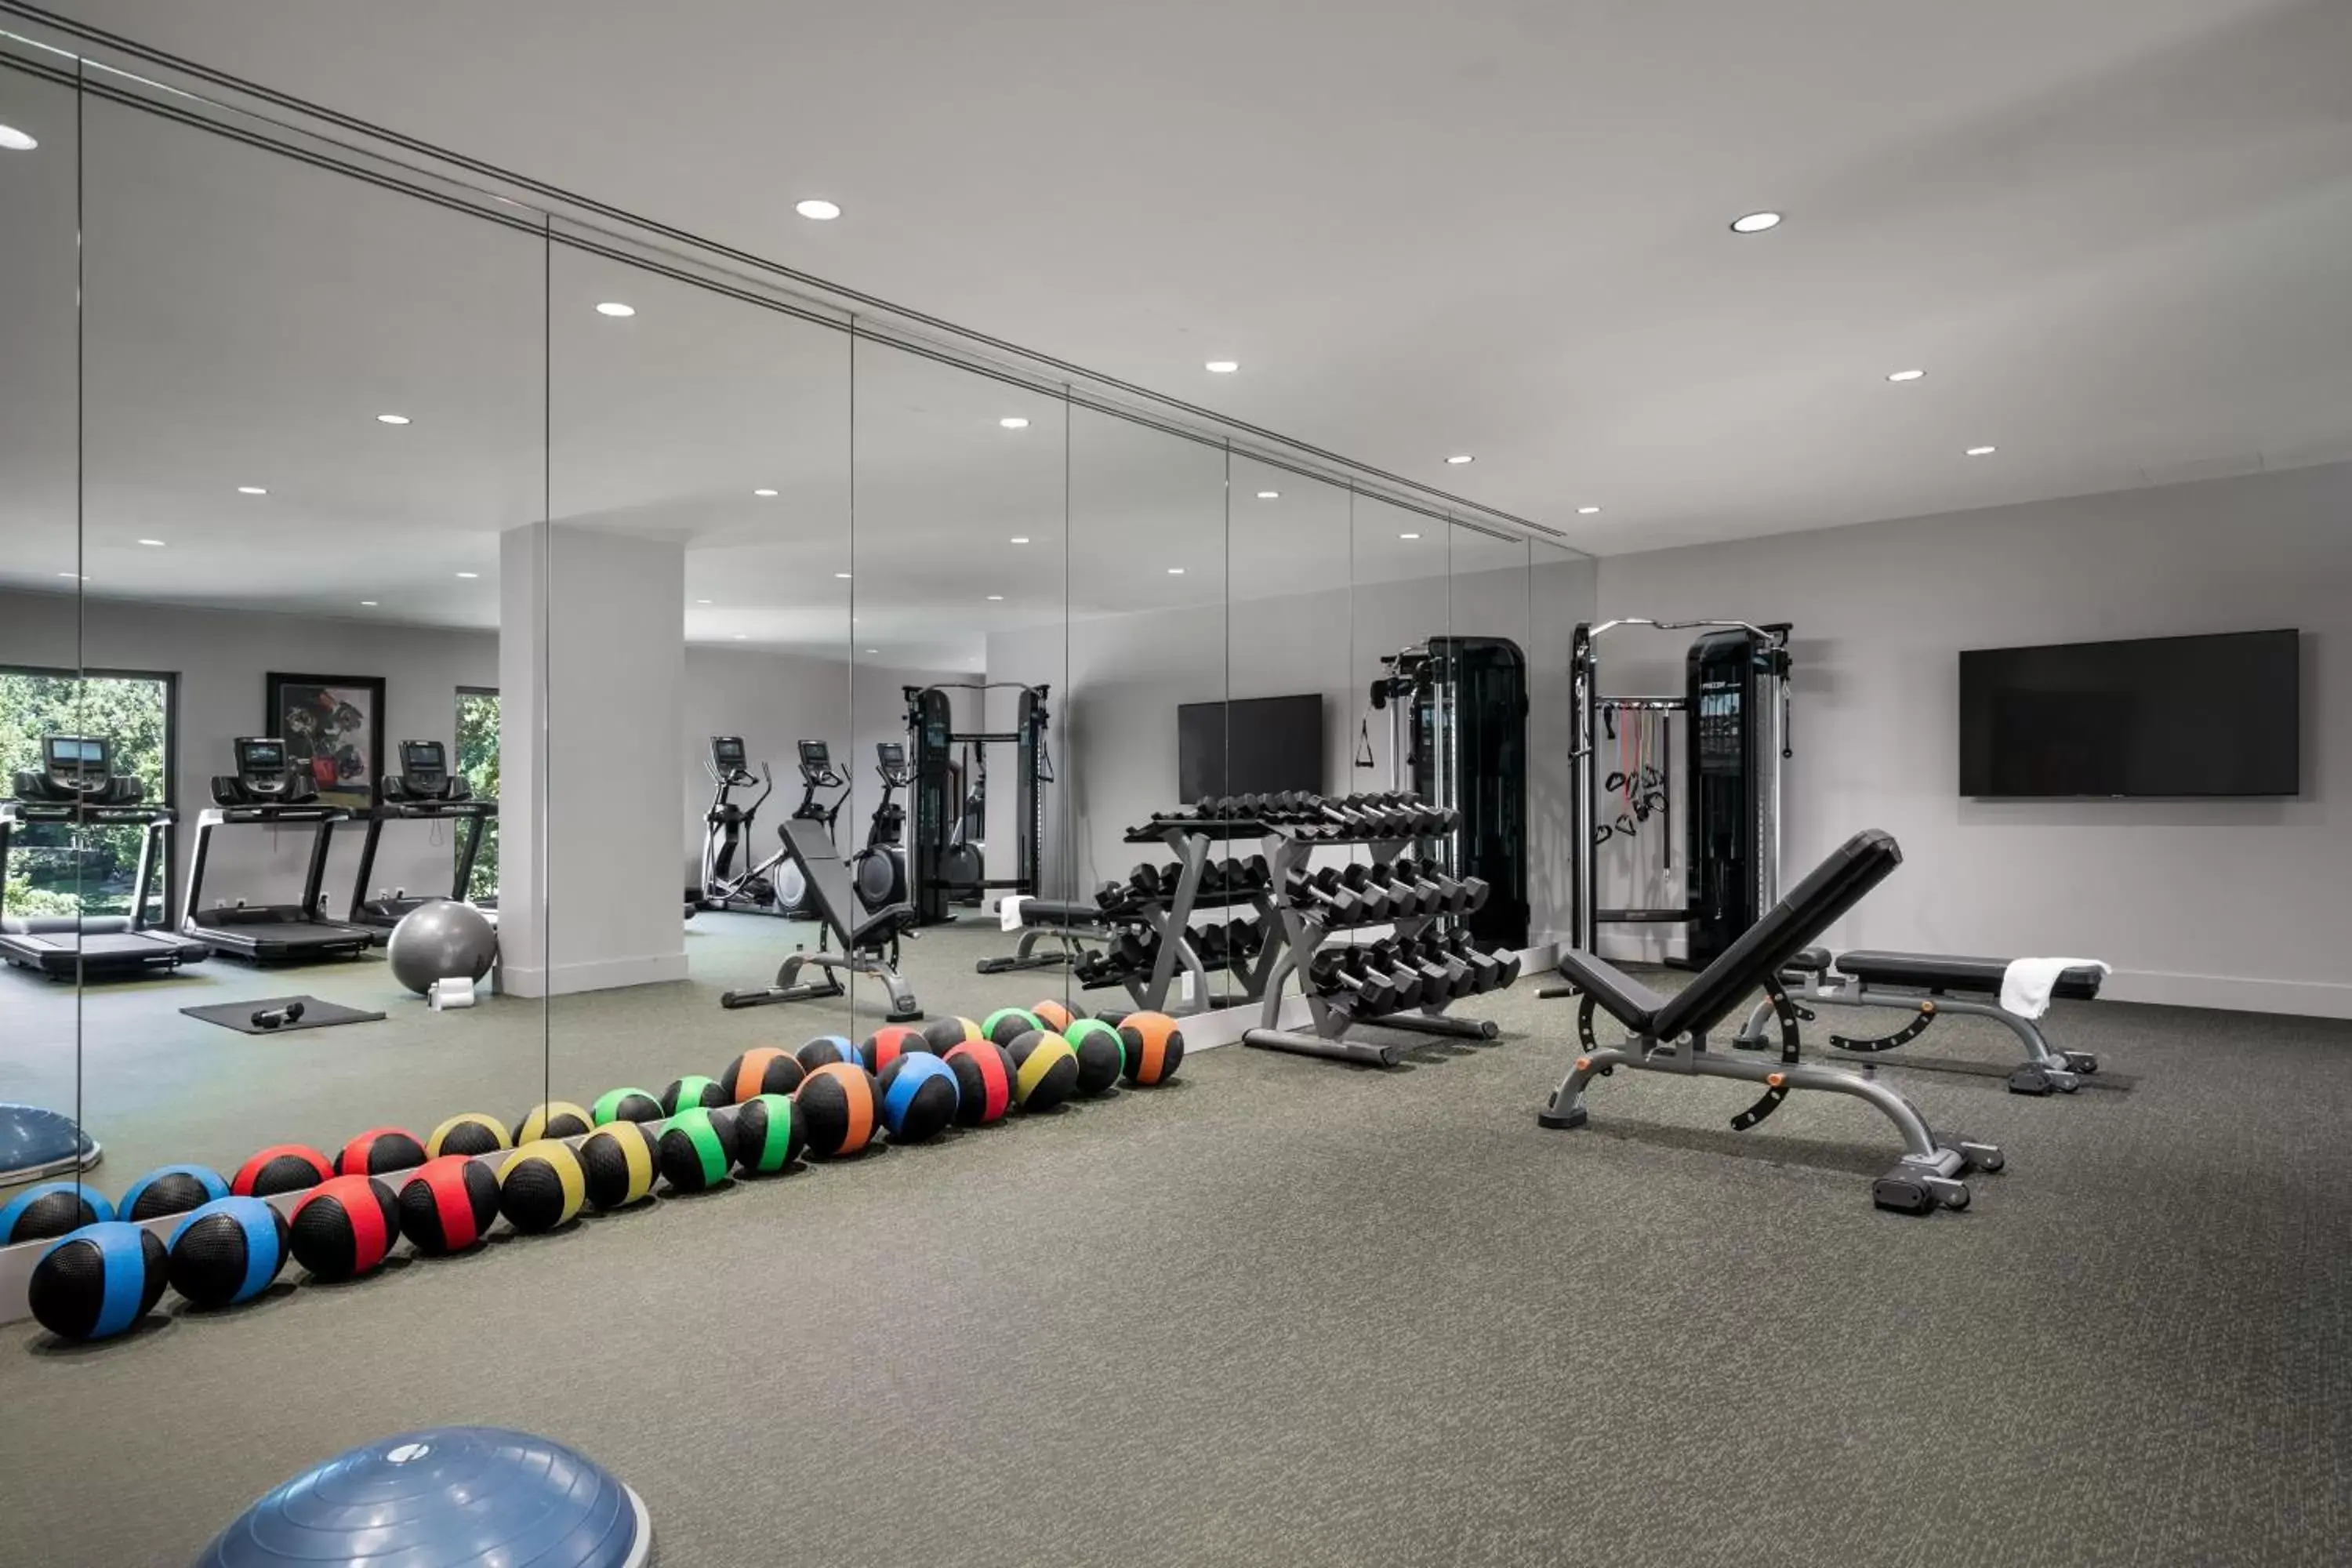 Fitness centre/facilities, Fitness Center/Facilities in Grand Bohemian Lodge Greenville, Autograph Collection